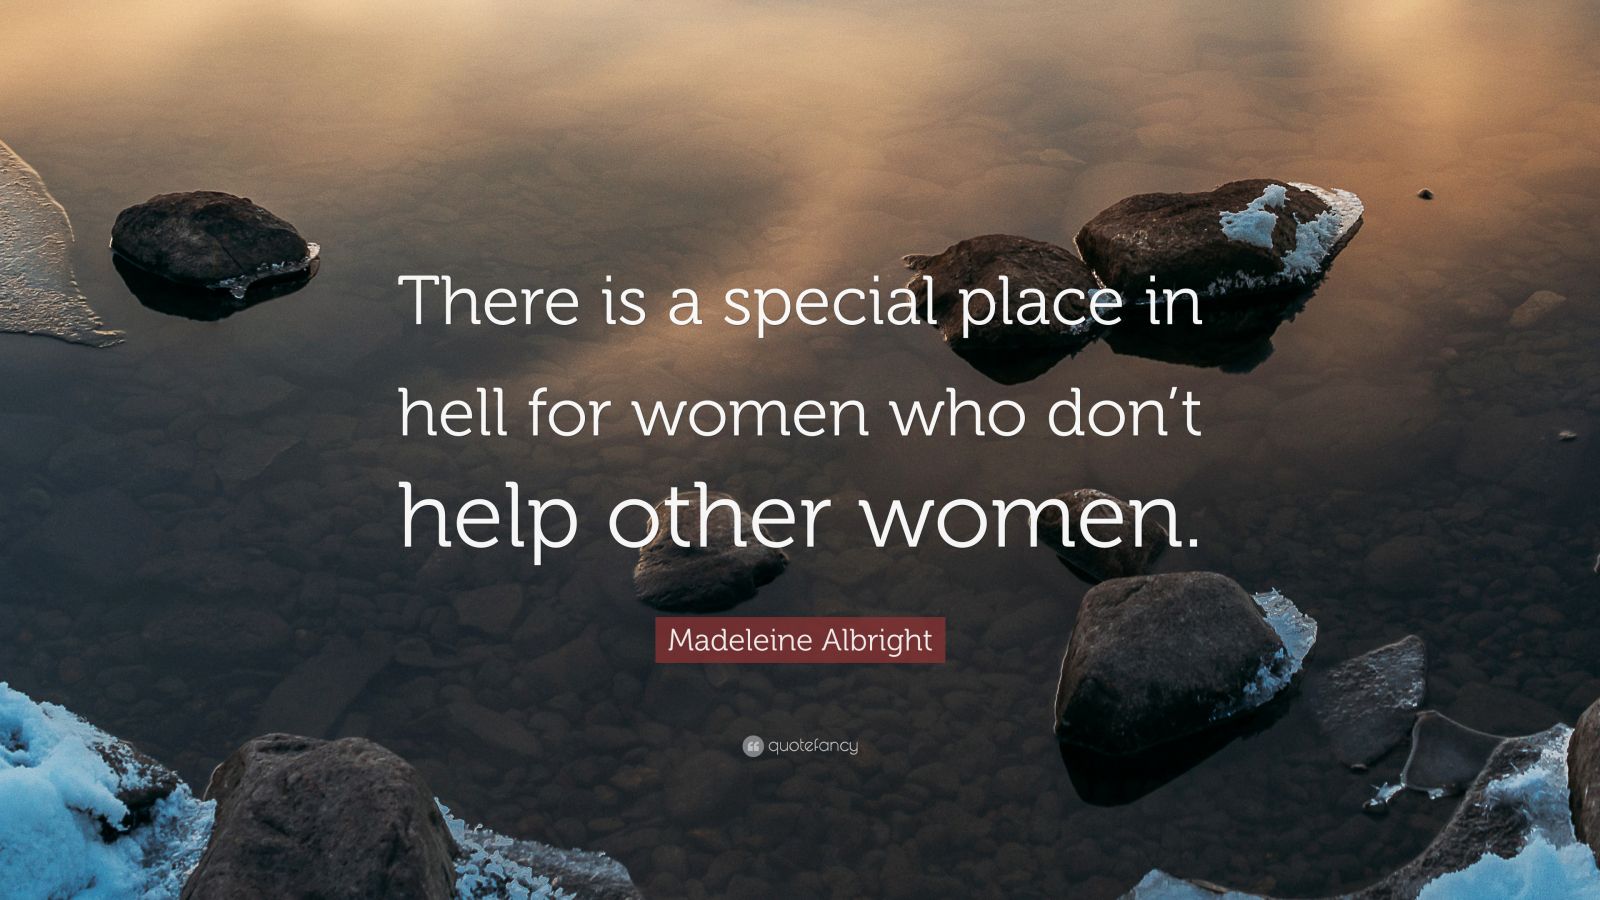 Madeleine Albright Quote: "There is a special place in ...